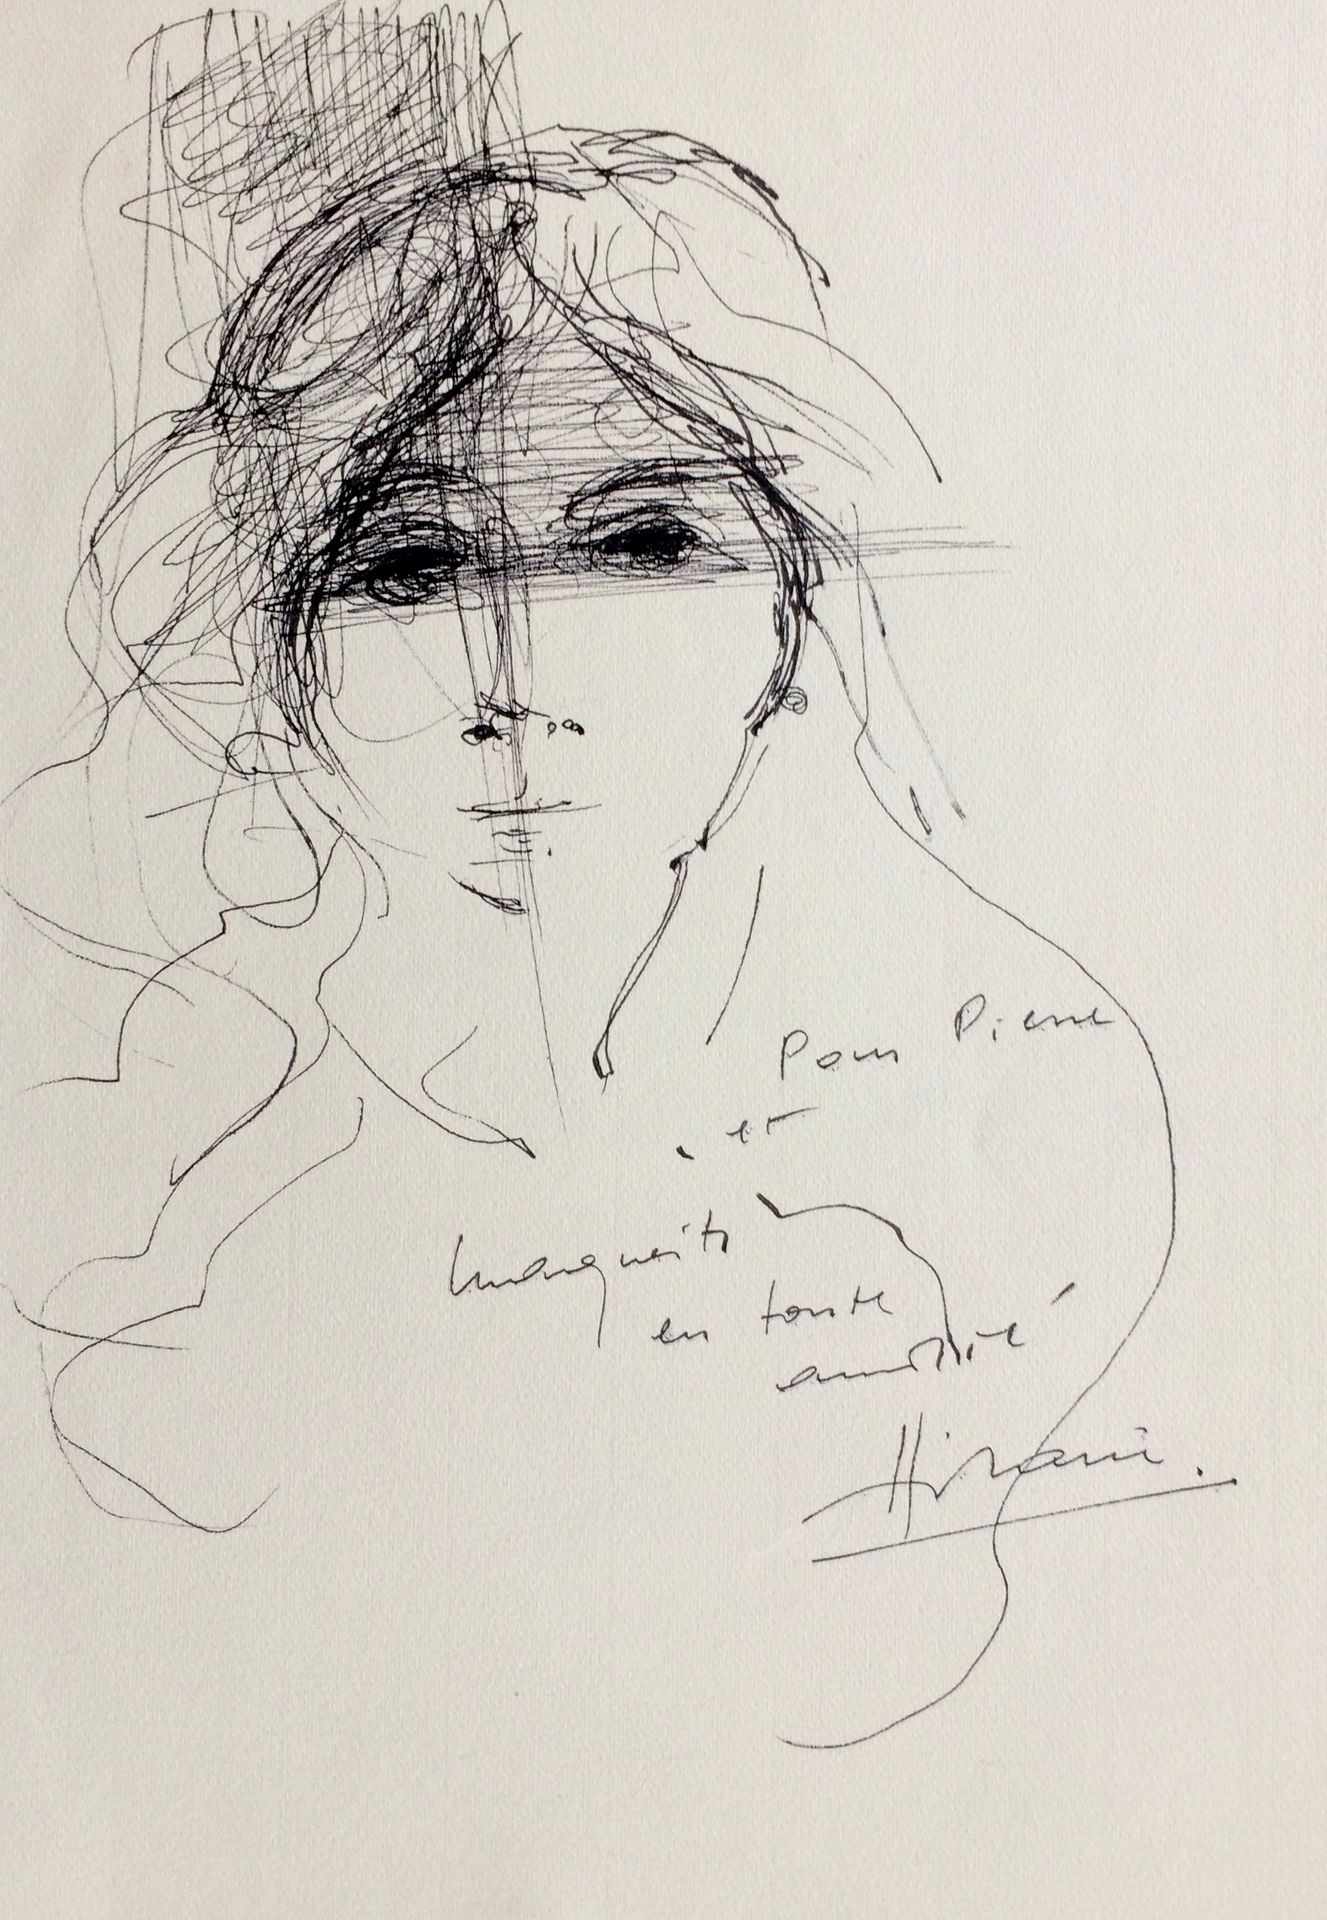 Camille HILAIRE Camille HILAIRE

Portrait, 1975

Original ink drawing signed and&hellip;